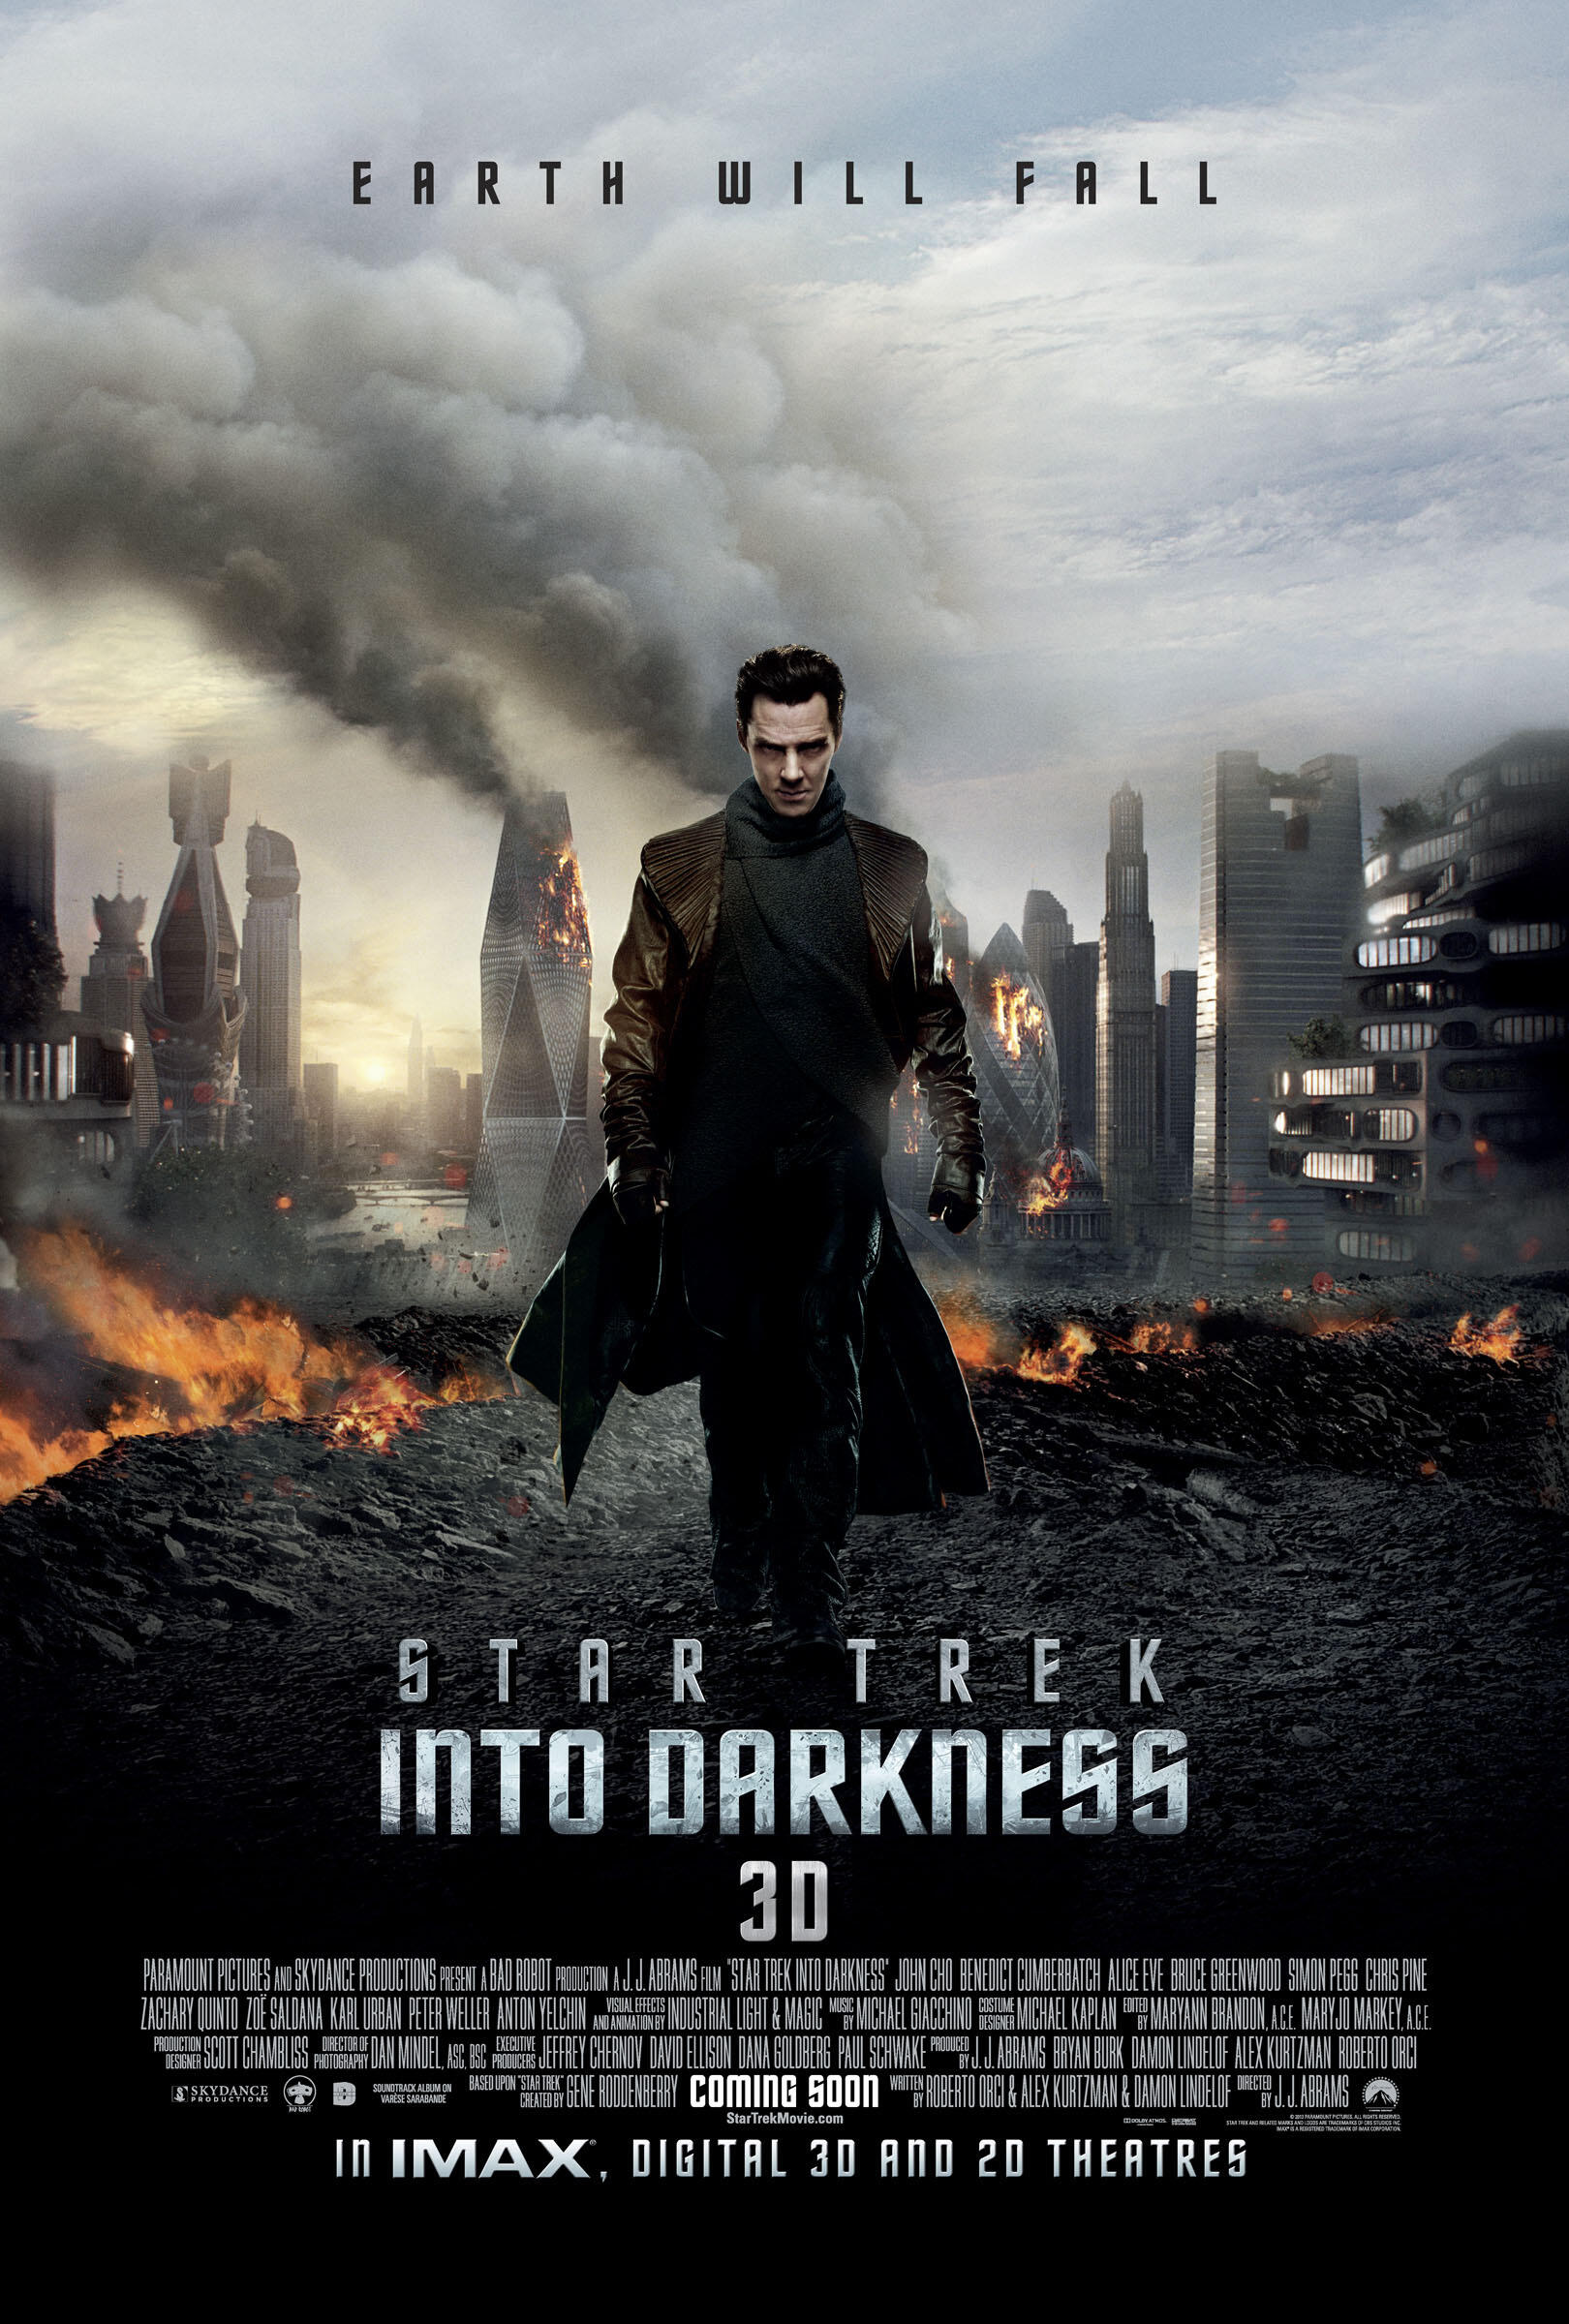 15 Fun Facts about 'Star Trek Into Darkness'